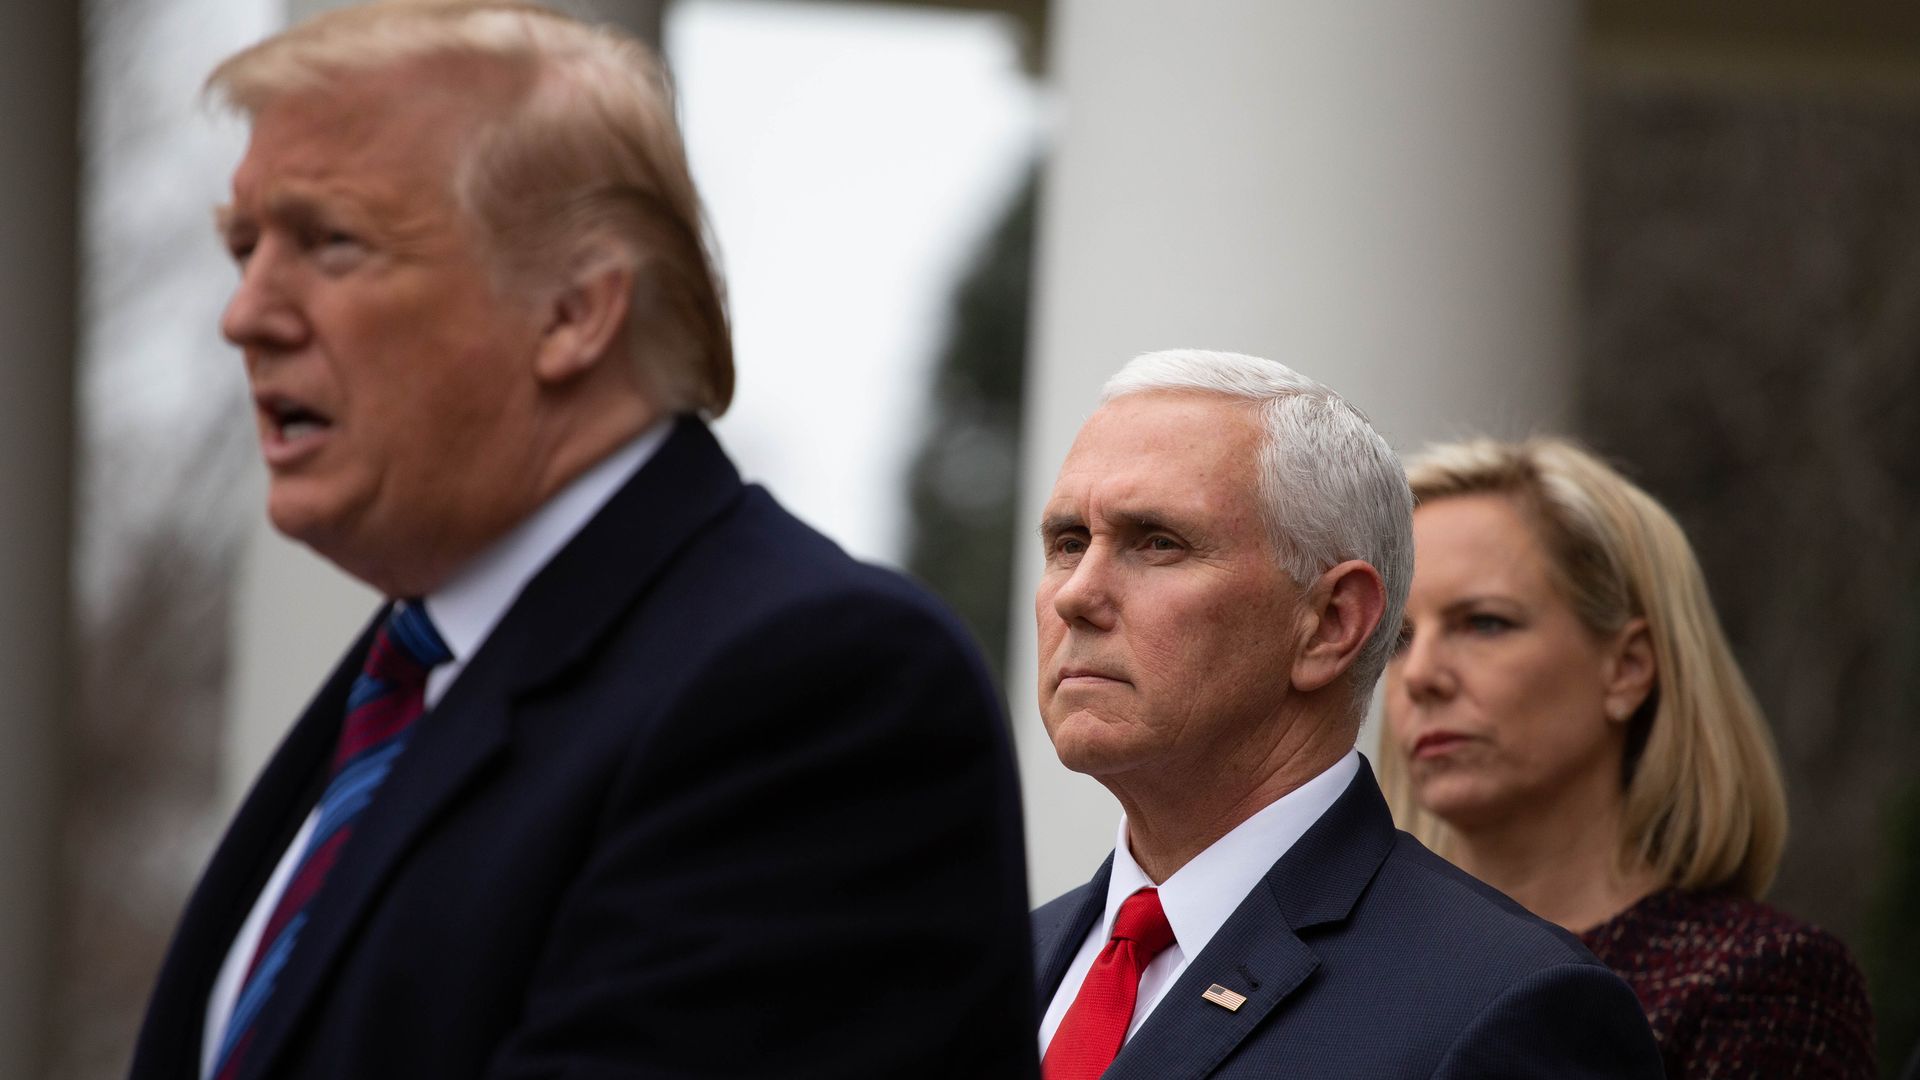 Vice President Mike Pence stands behind President Trump.